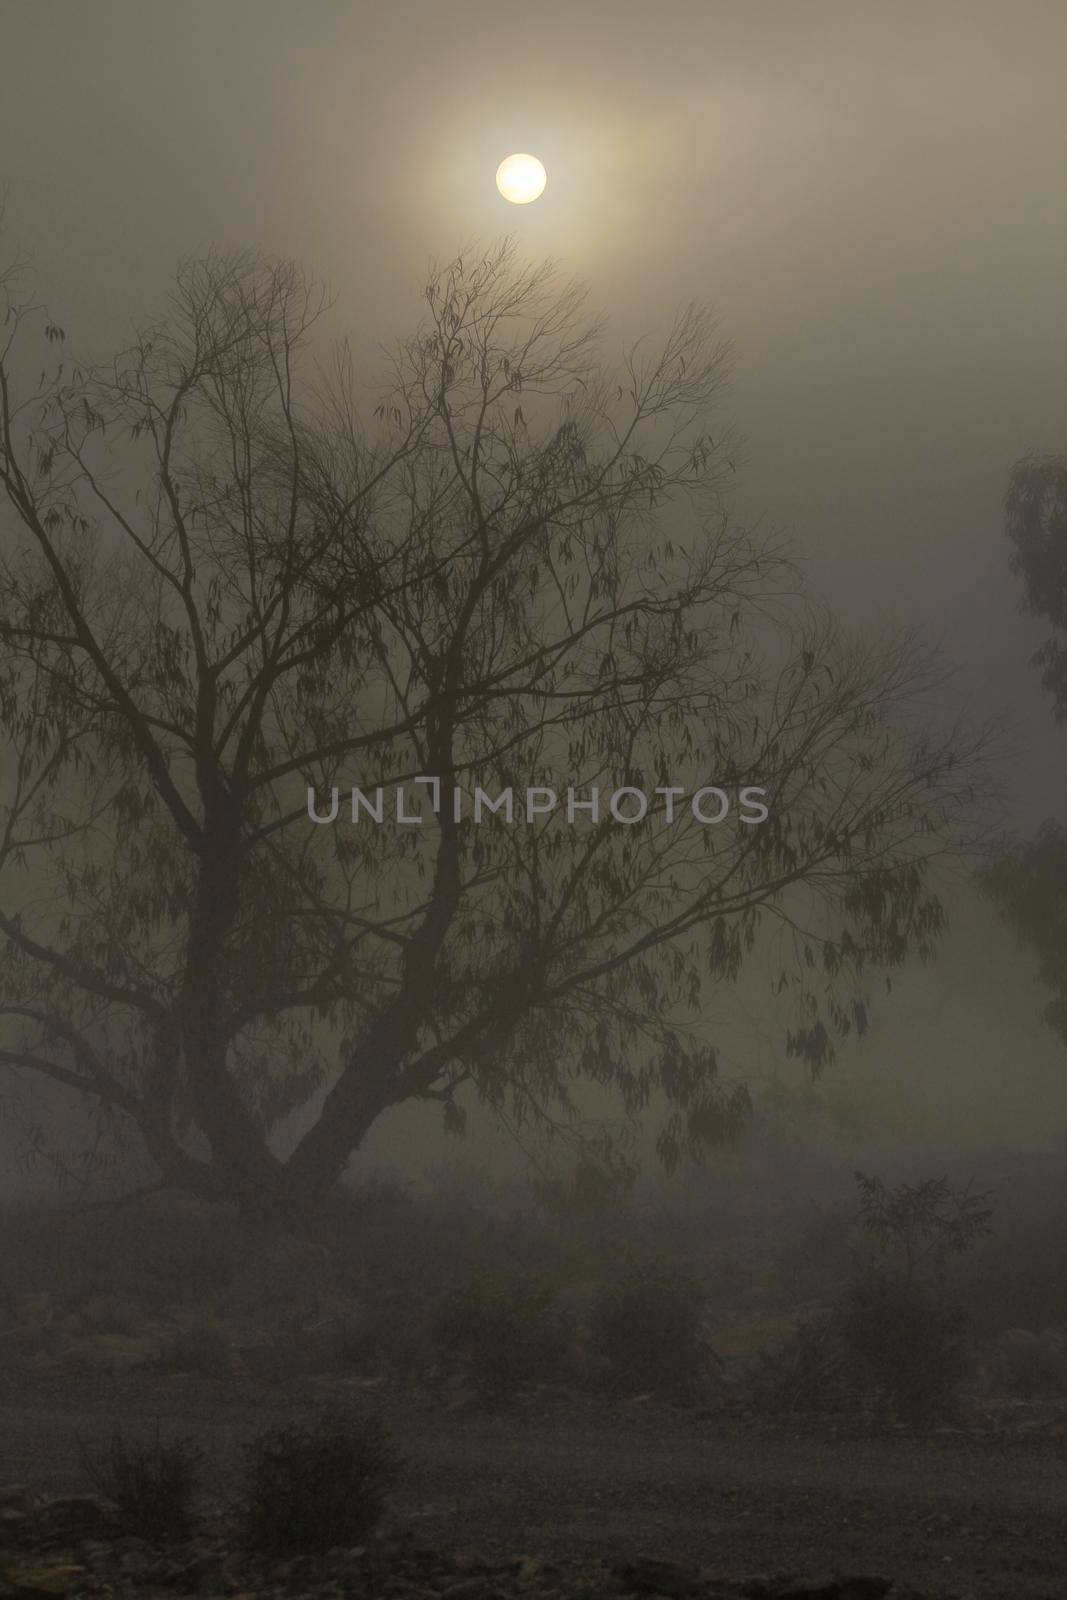 Eucalyptus forest covered by fog in the morning by soniabonet